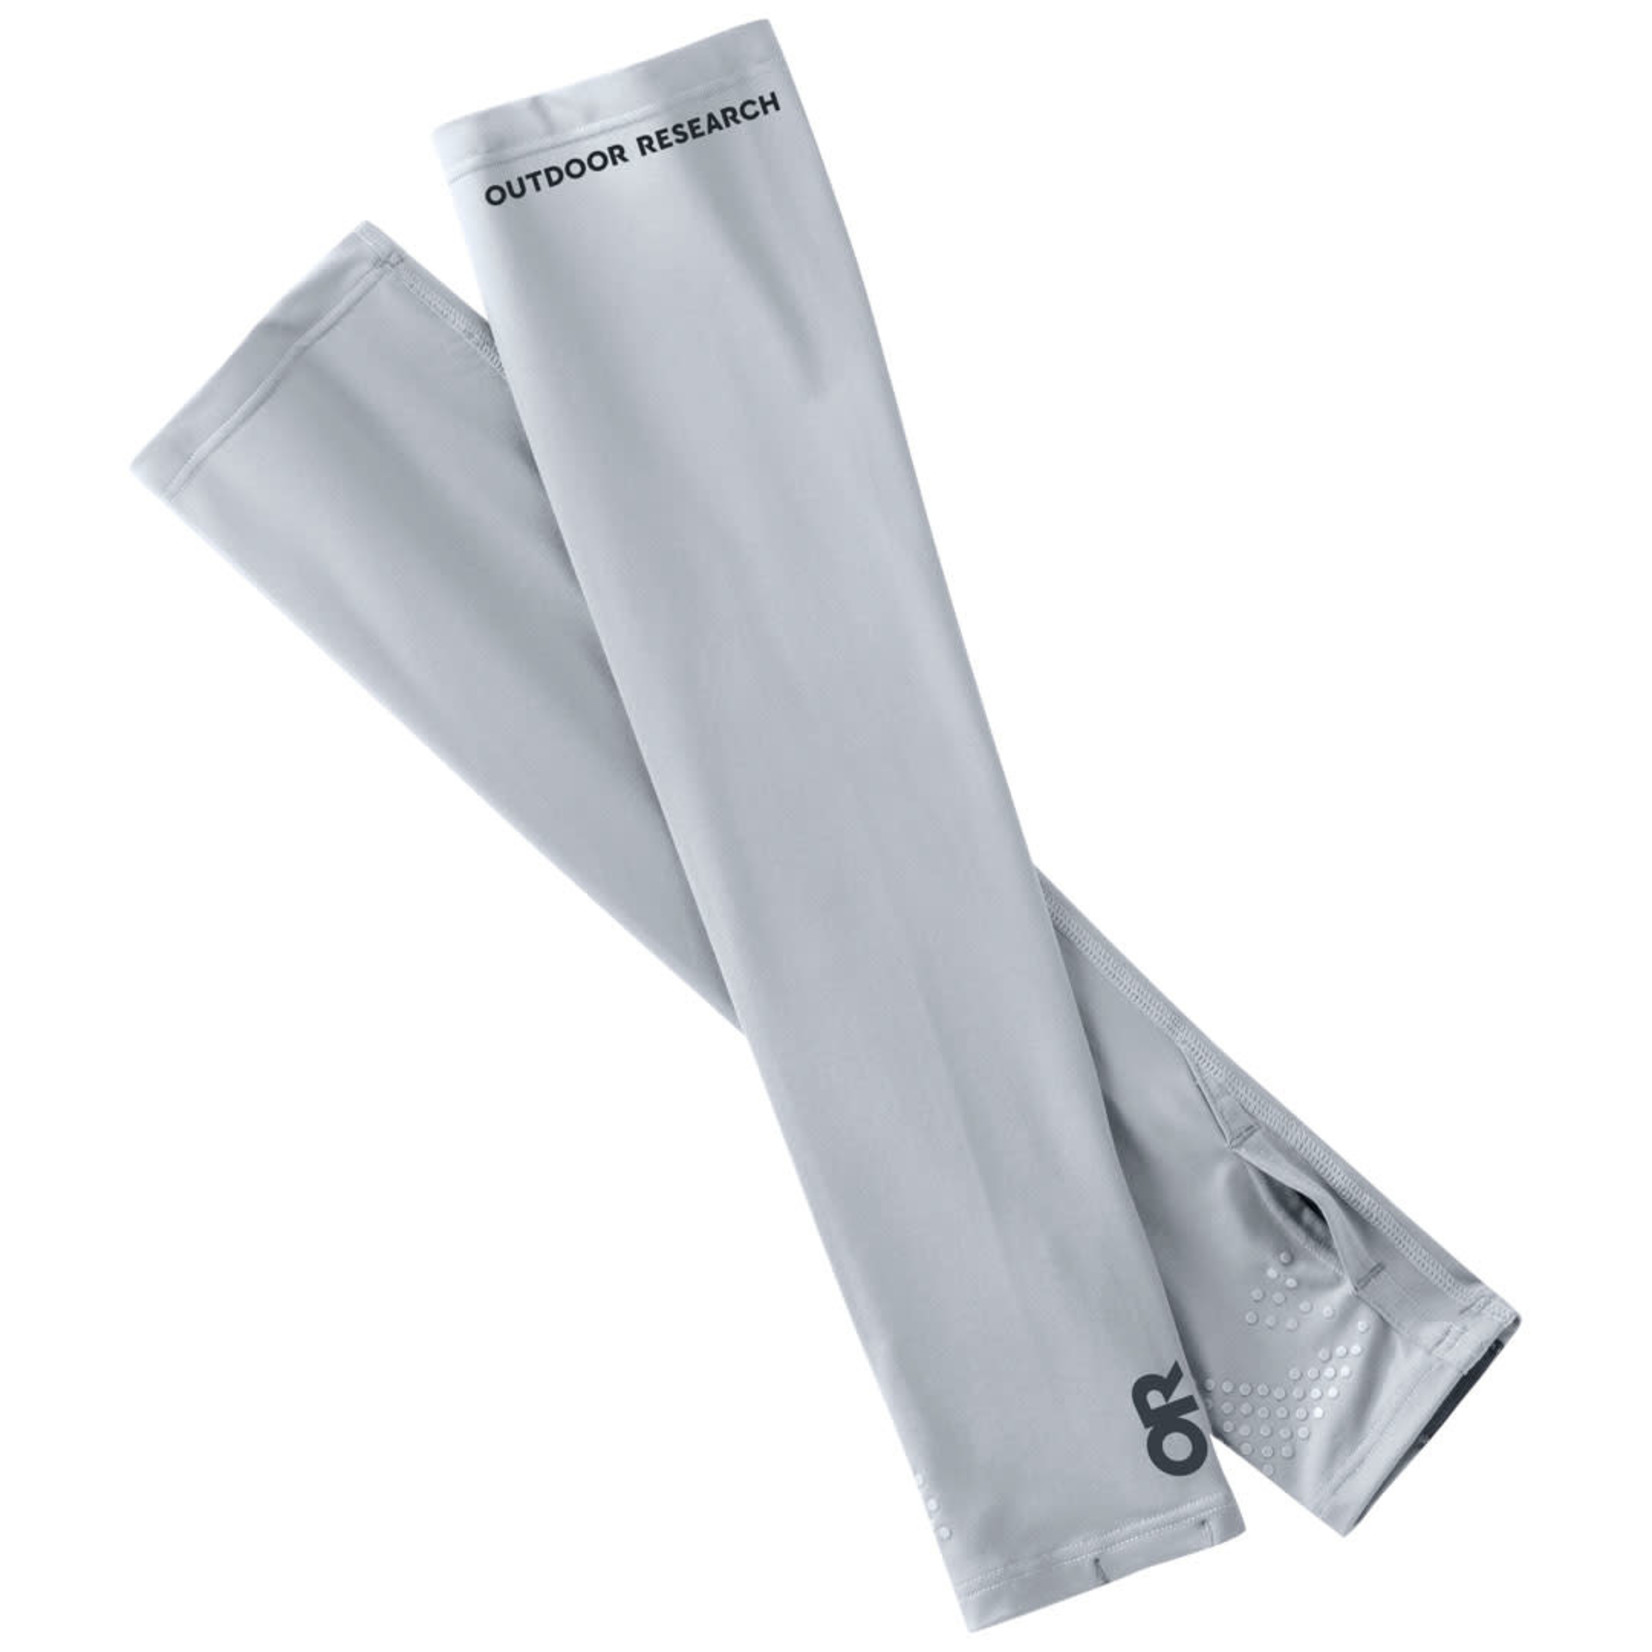 Outdoor Research ActiveIce Sun Sleeves 250148